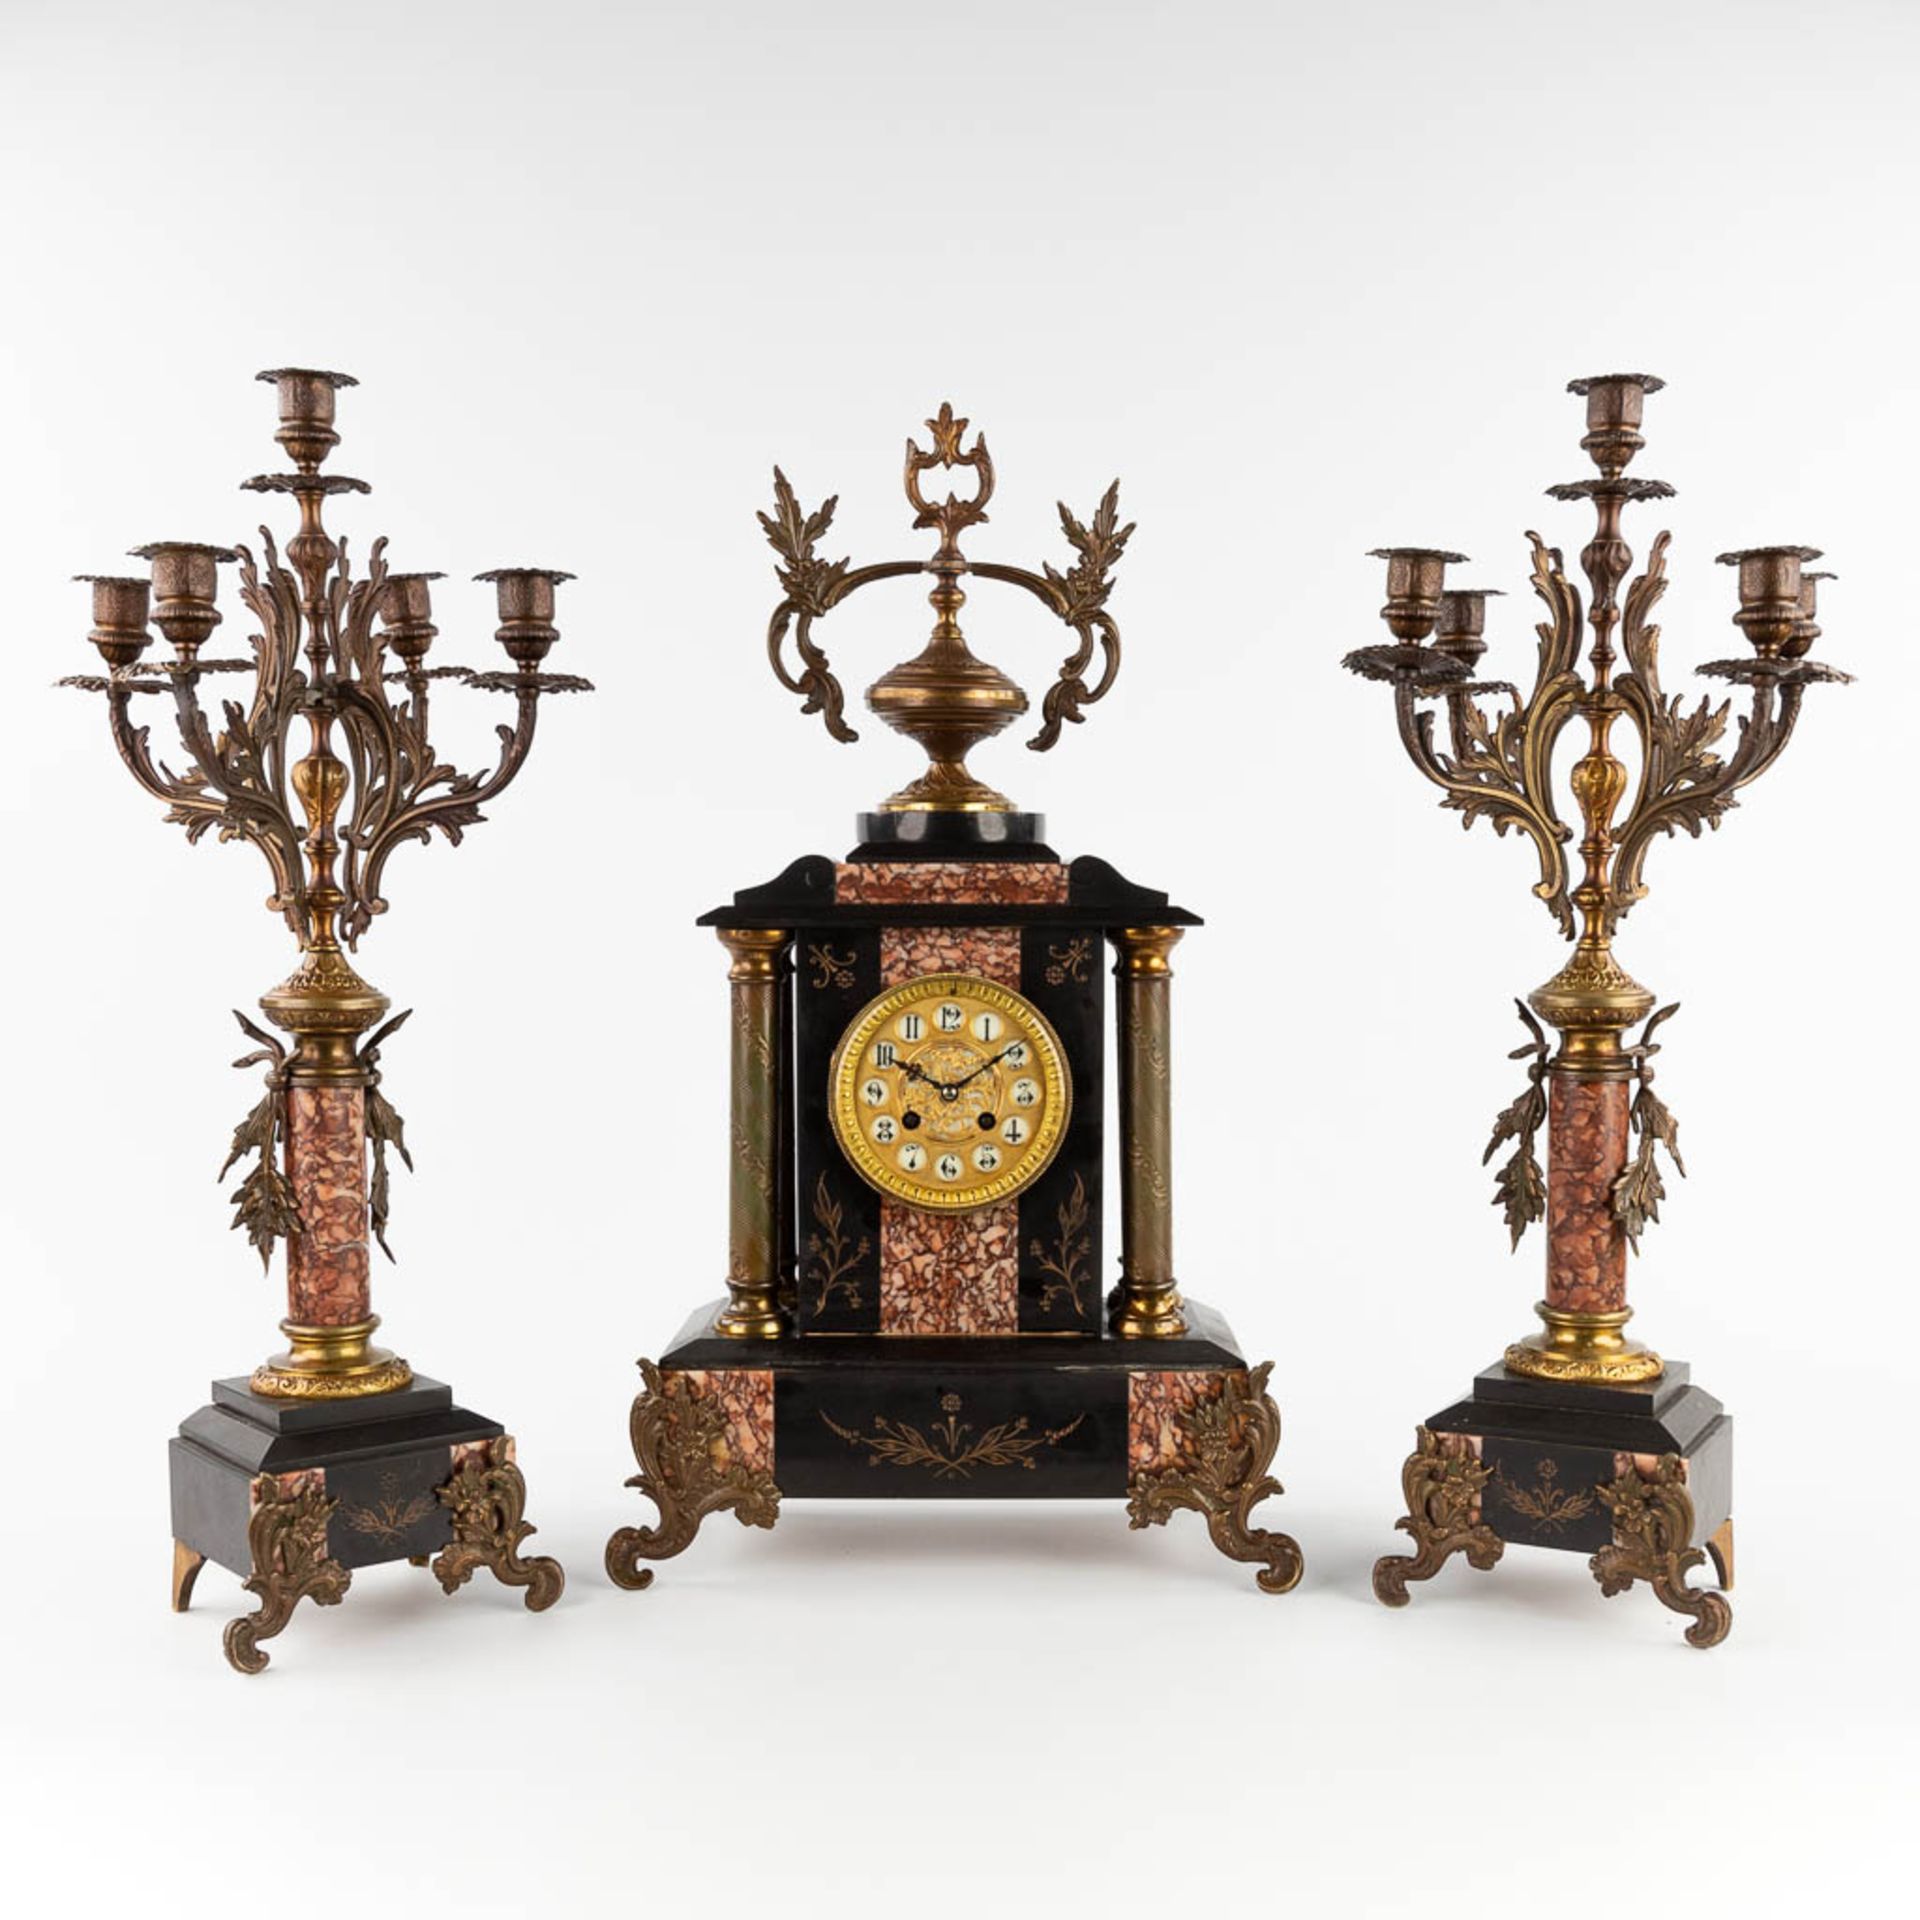 A three-piece mantle garniture, marble and bronze. Circa 1900. (L:16 x W:34 x H:59 cm) - Image 3 of 15